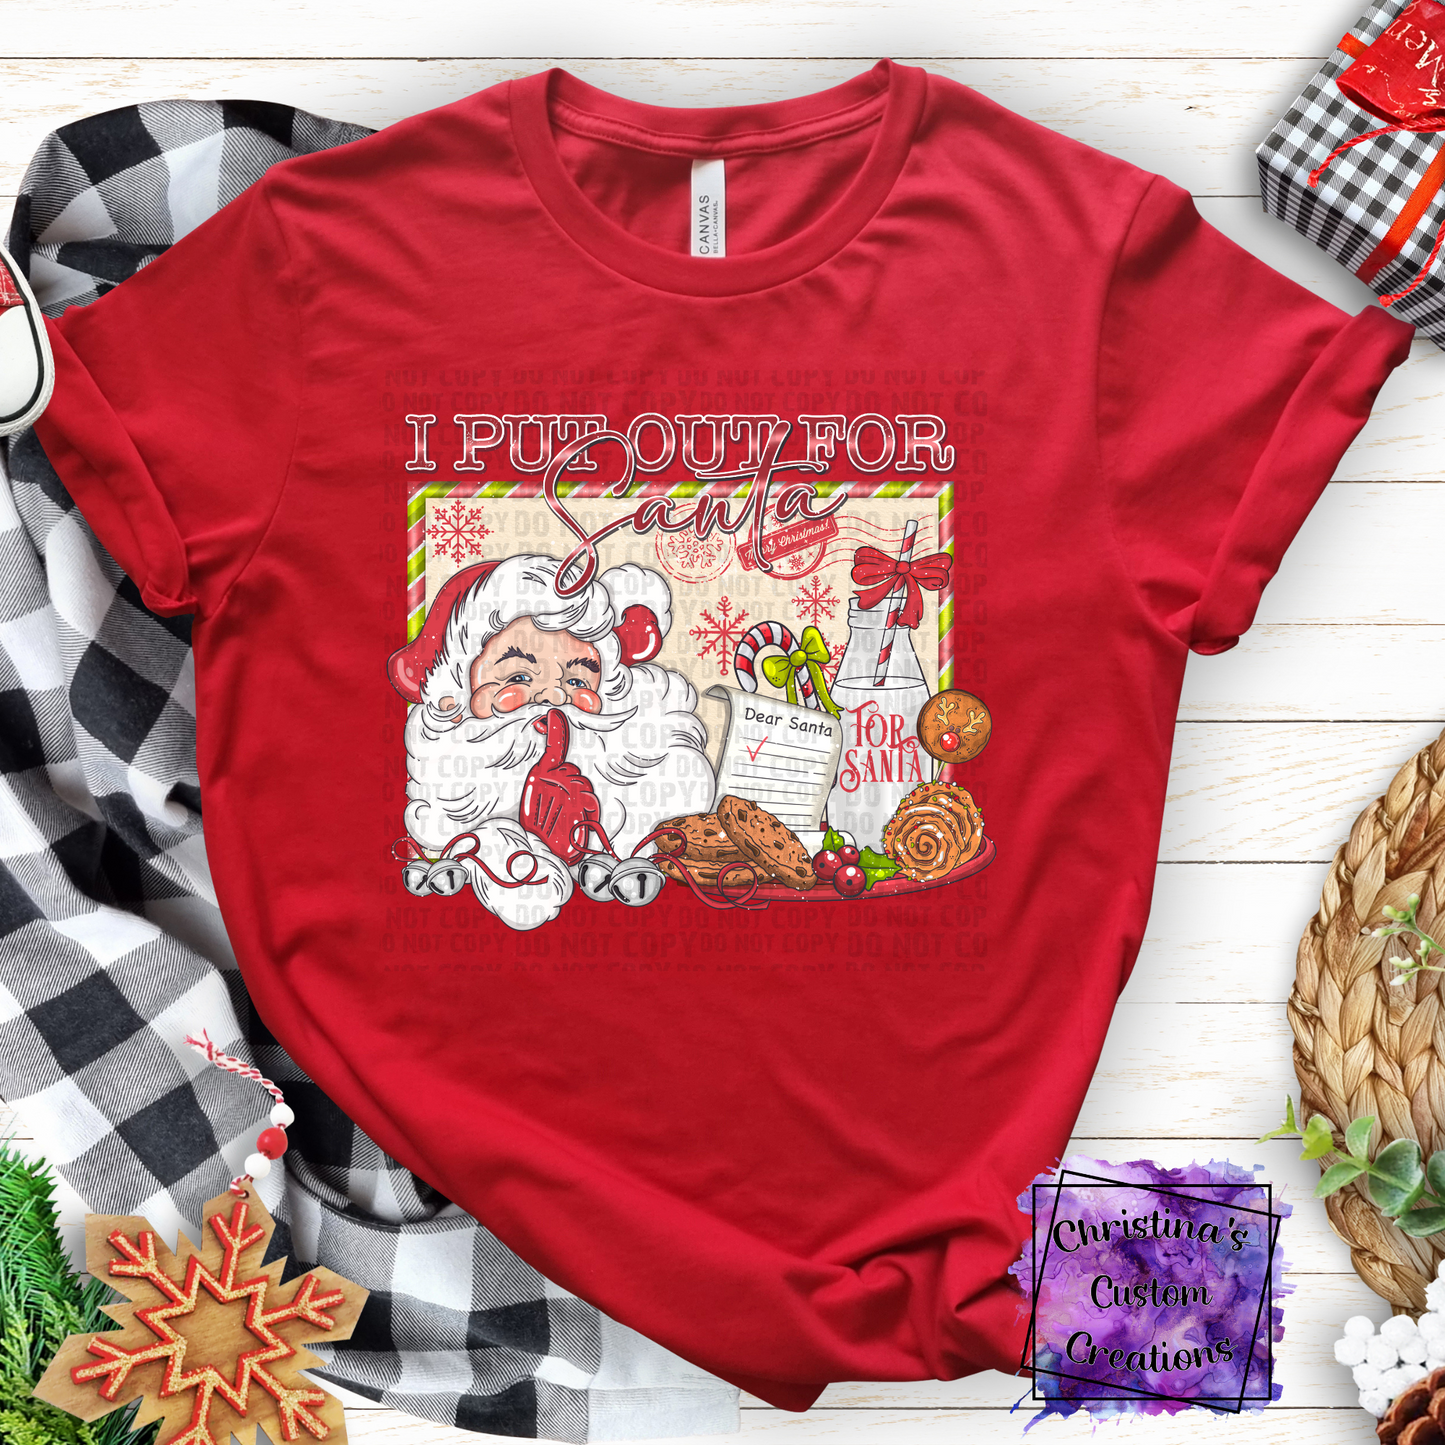 I Put Out For Santa T-Shirt | Funny Christmas Shirt | Fast Shipping | Super Soft Shirts for Women/Kid's